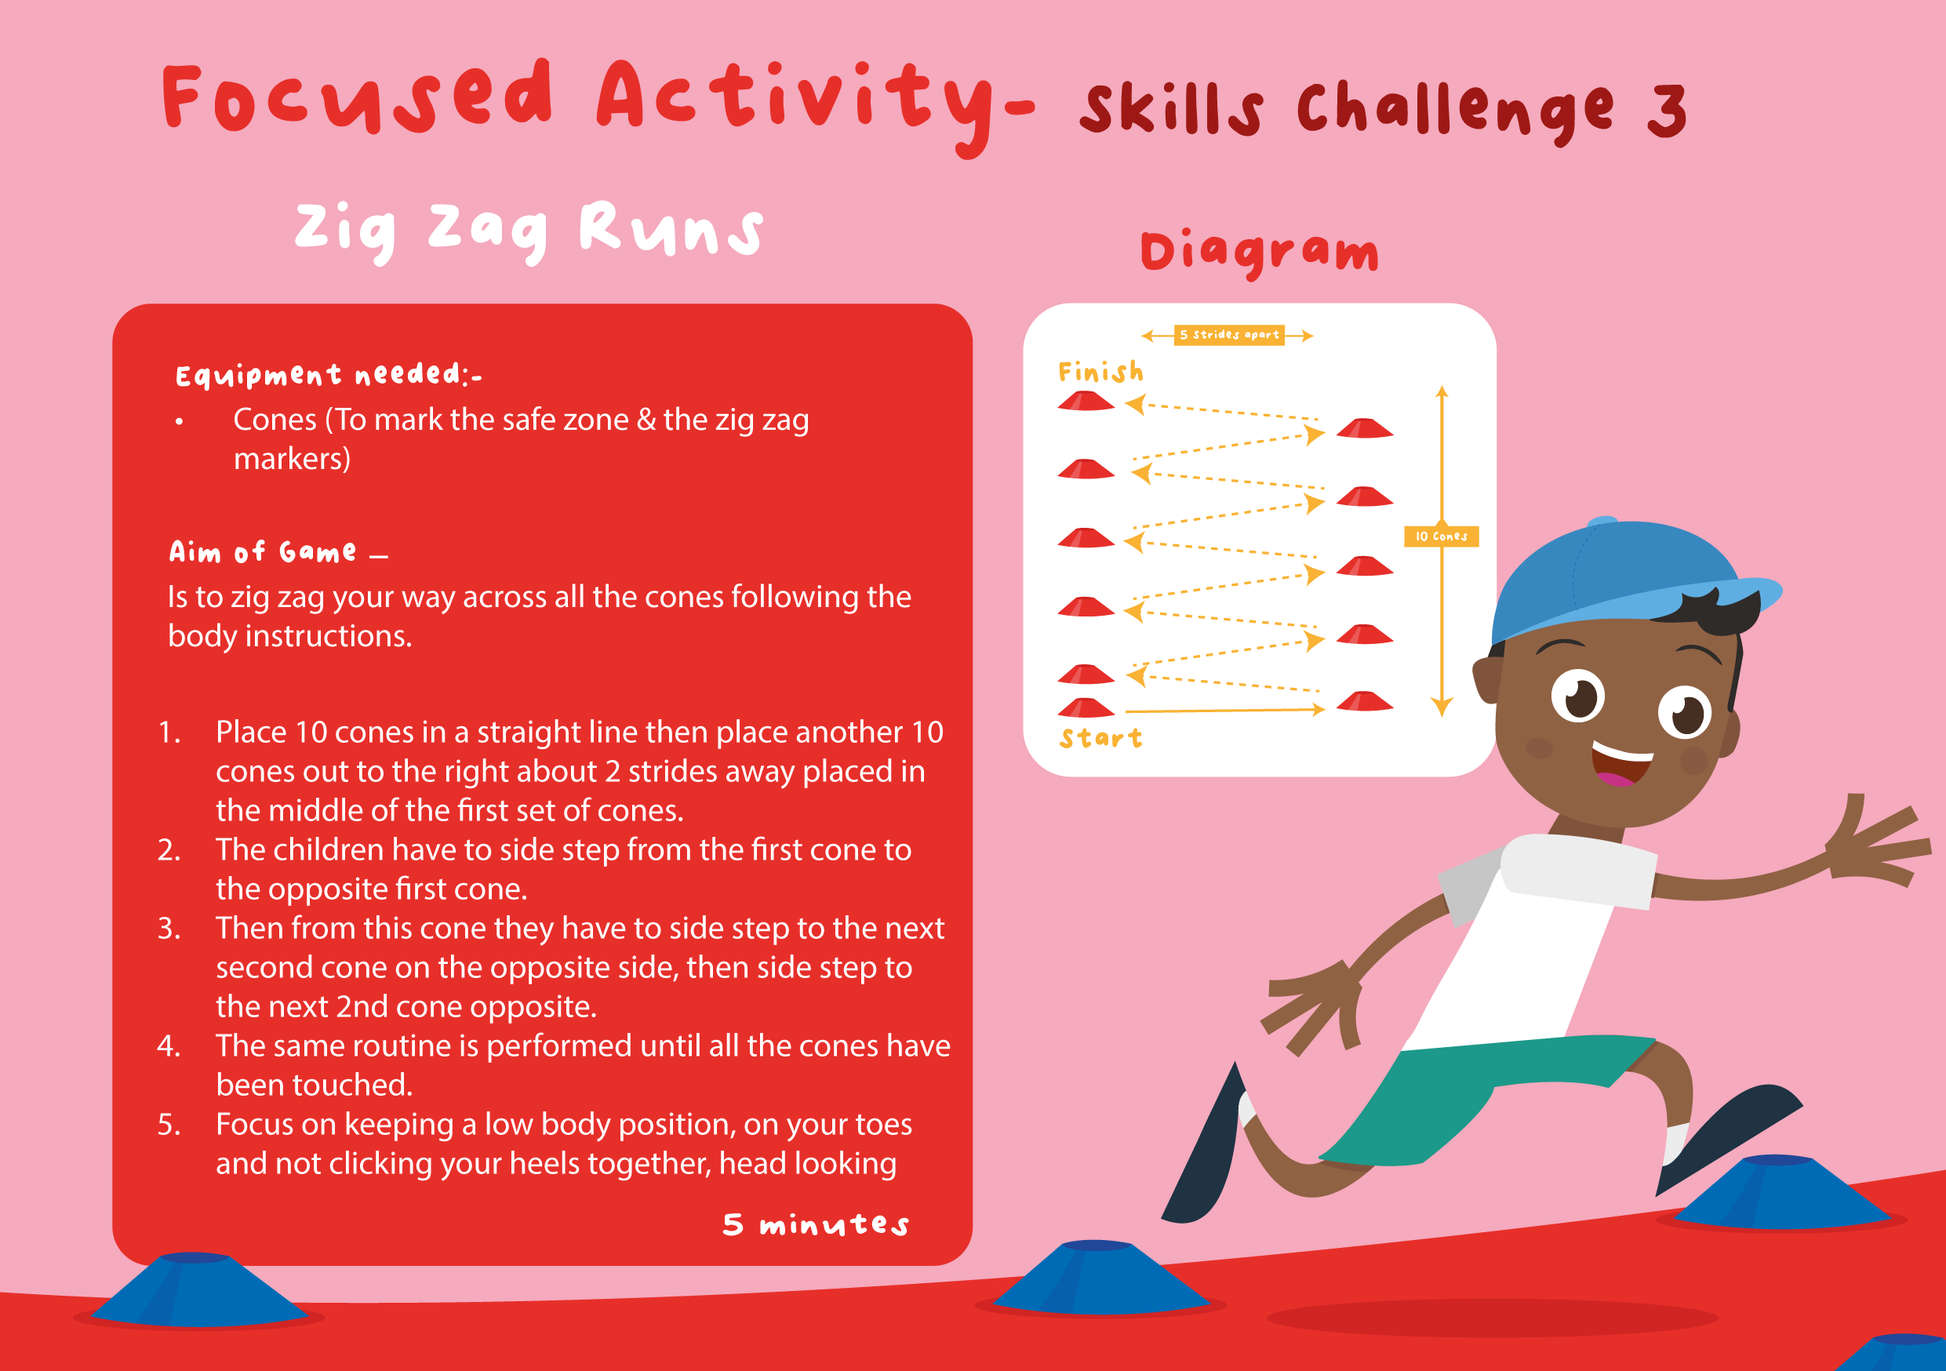 Zig Zag Runs challenge to assess a child's speed and agility using coloured markers